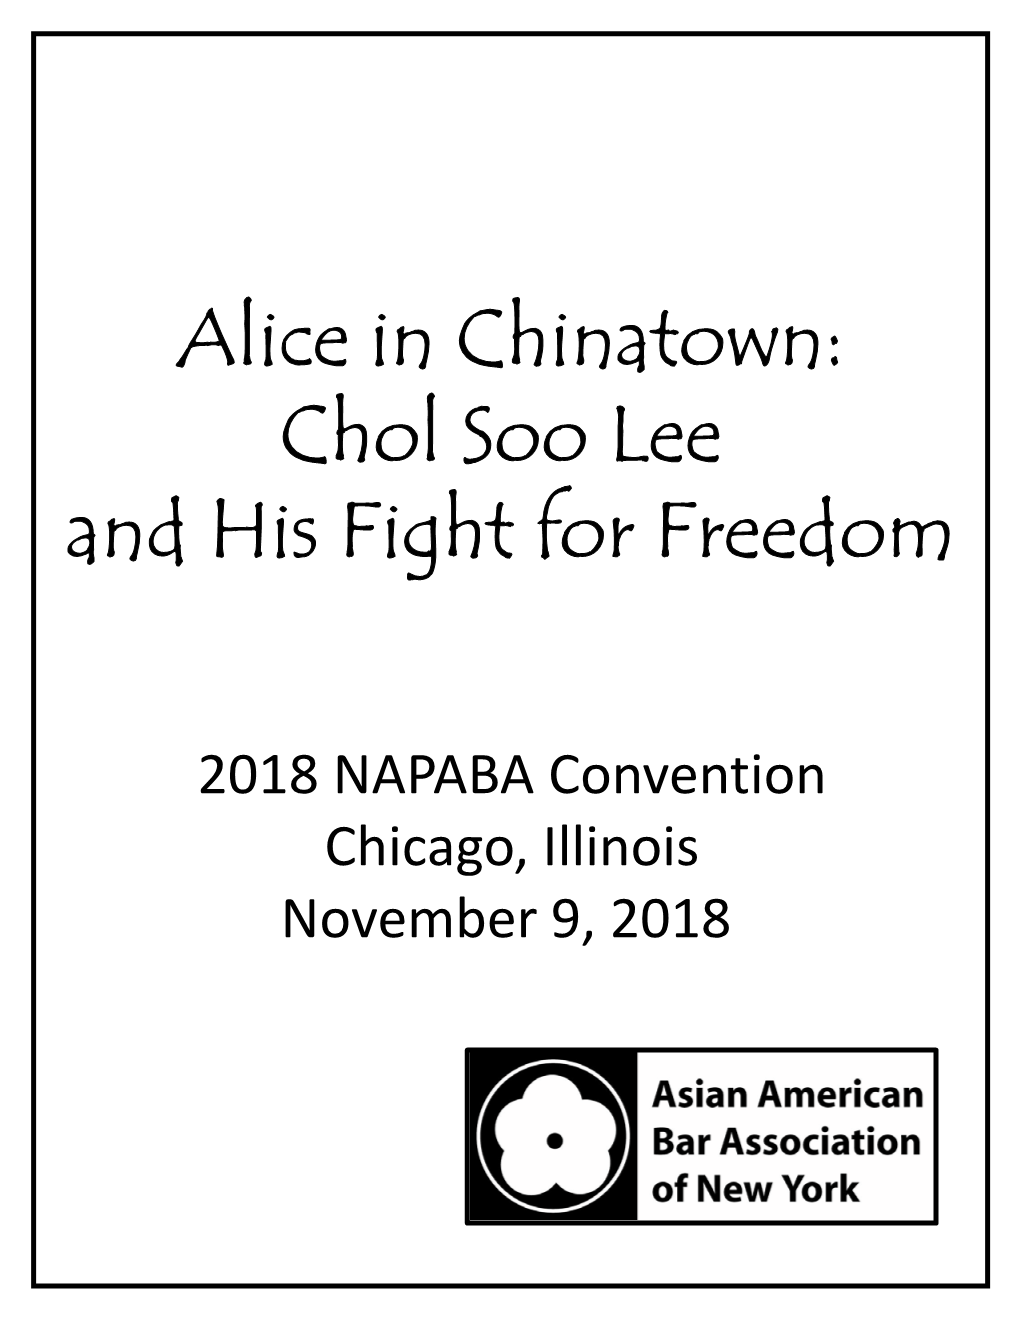 Alice in Chinatown: Chol Soo Lee and His Fight for Freedom